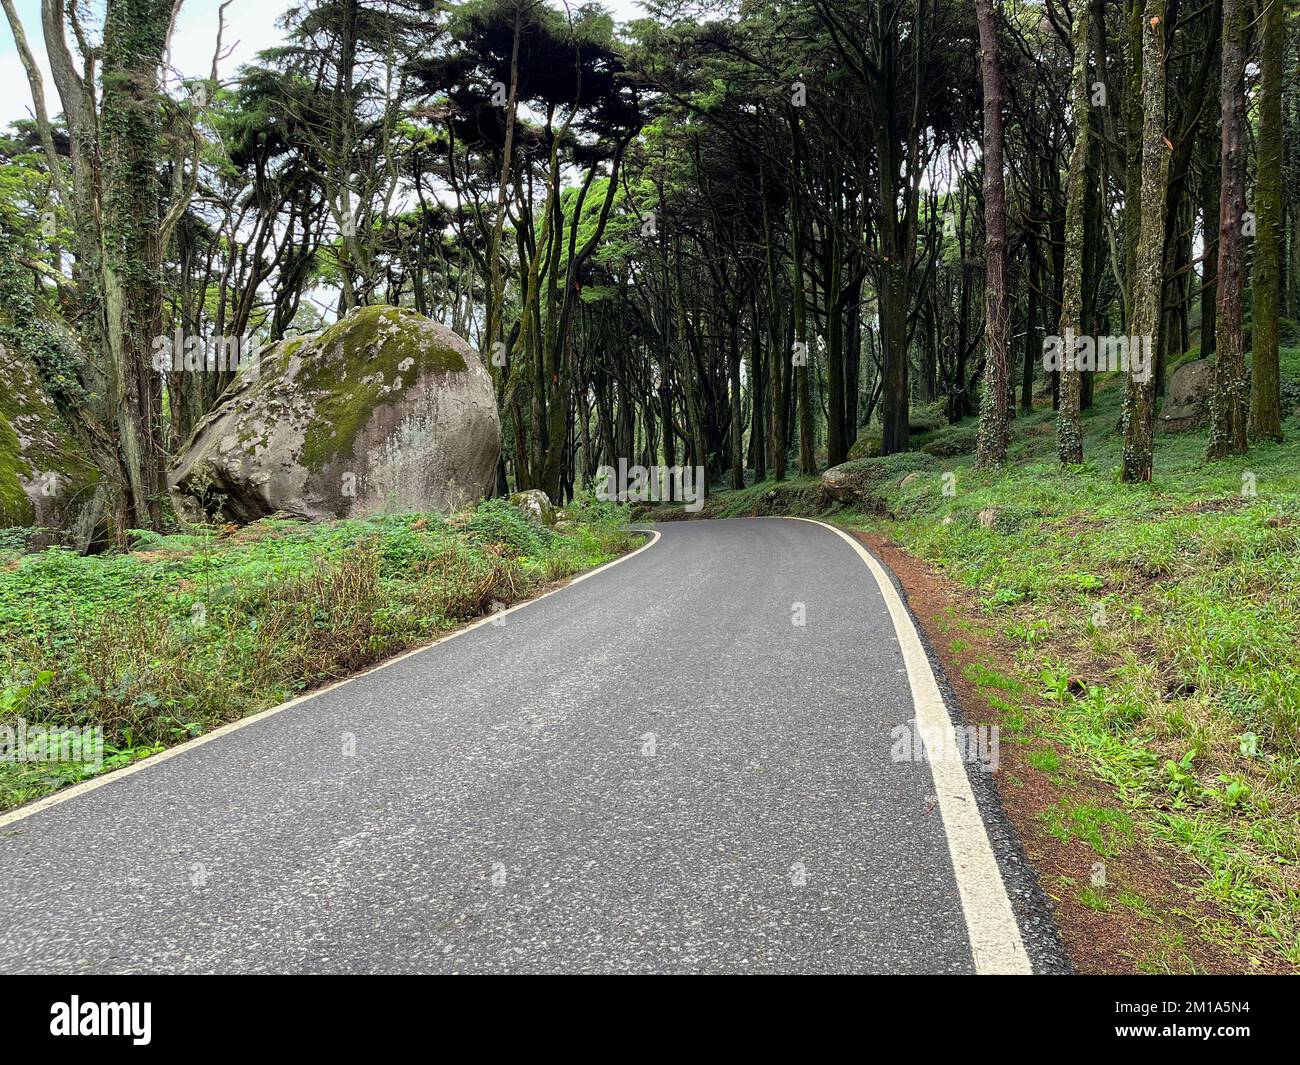 Road in a forest surrounded by old trees Stock Photo